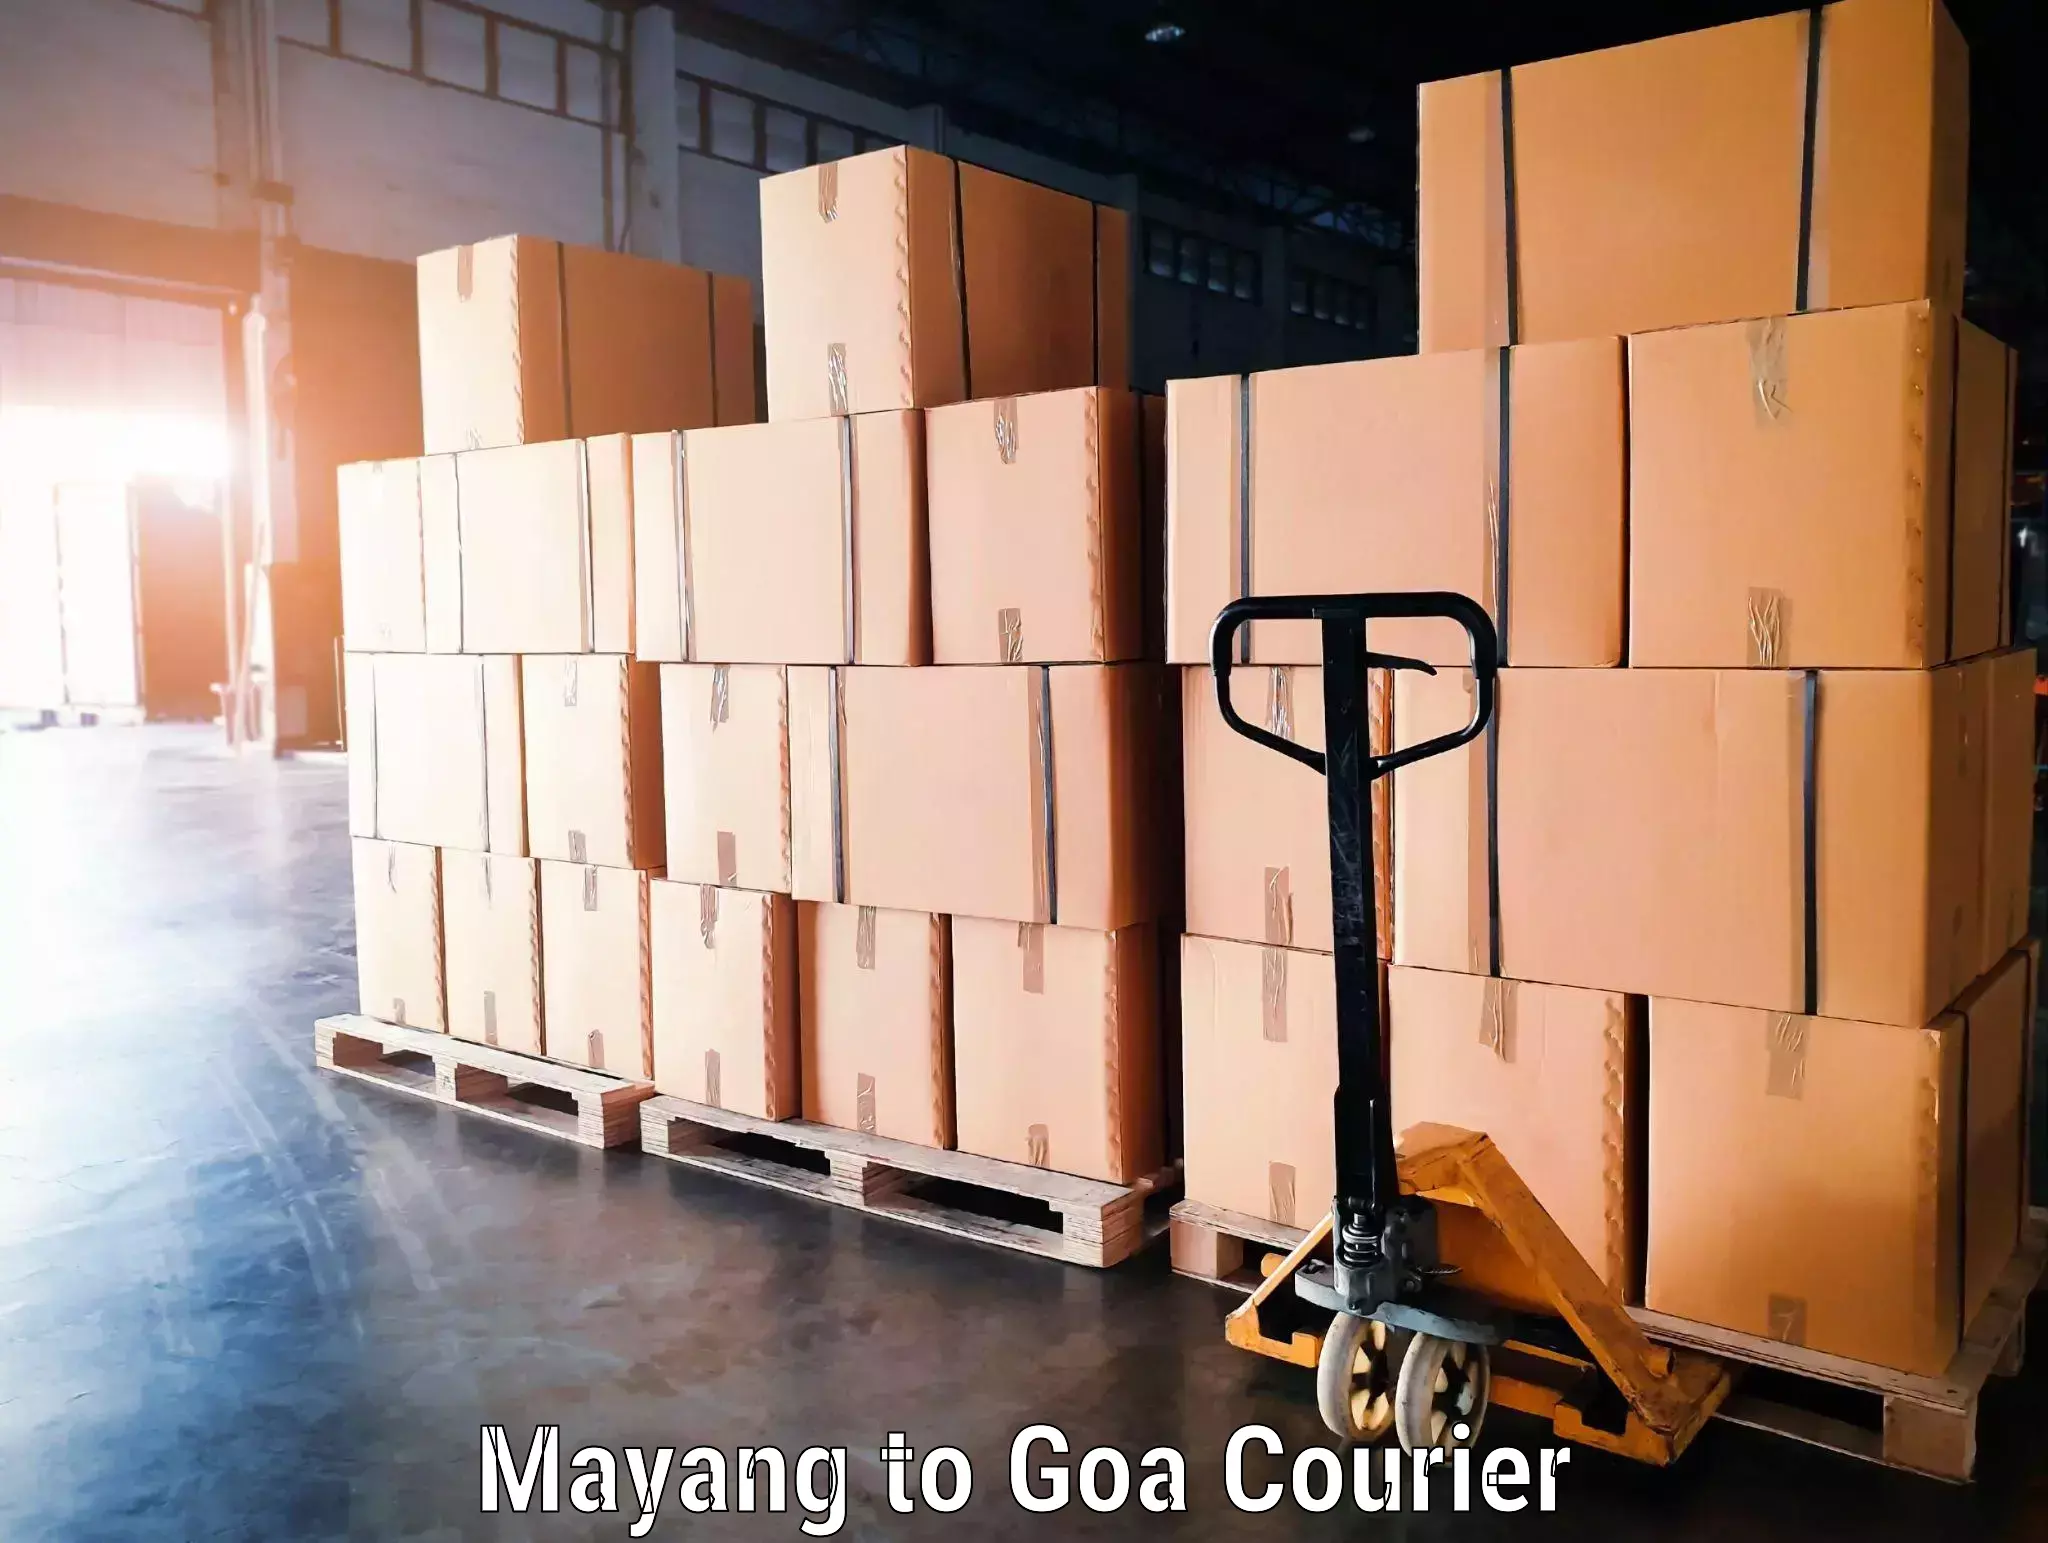 Luggage shipment specialists Mayang to Goa